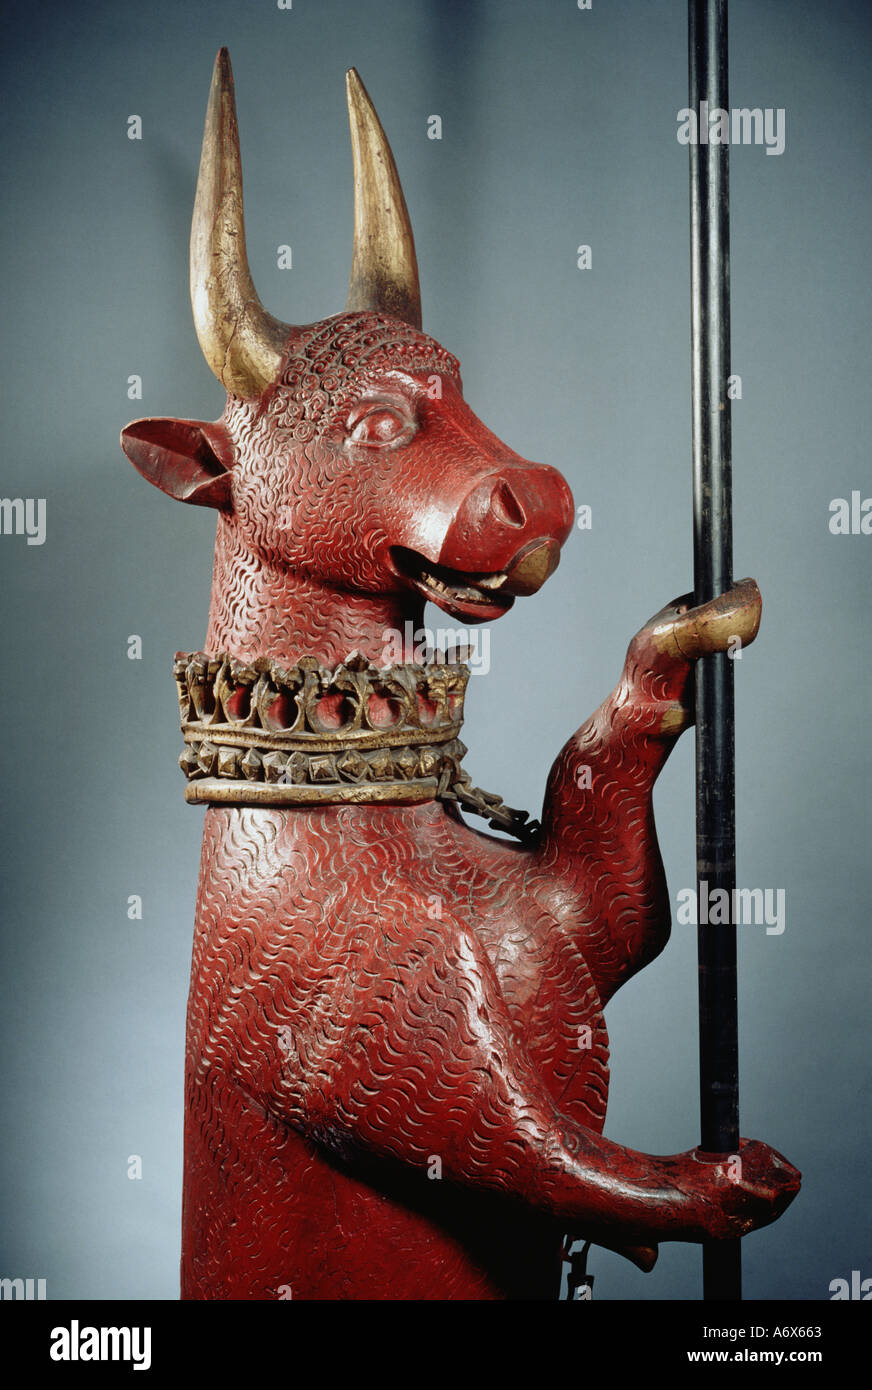 Heraldic Bull made for Thomas Lord Dacre. England, early 16th century. Stock Photo